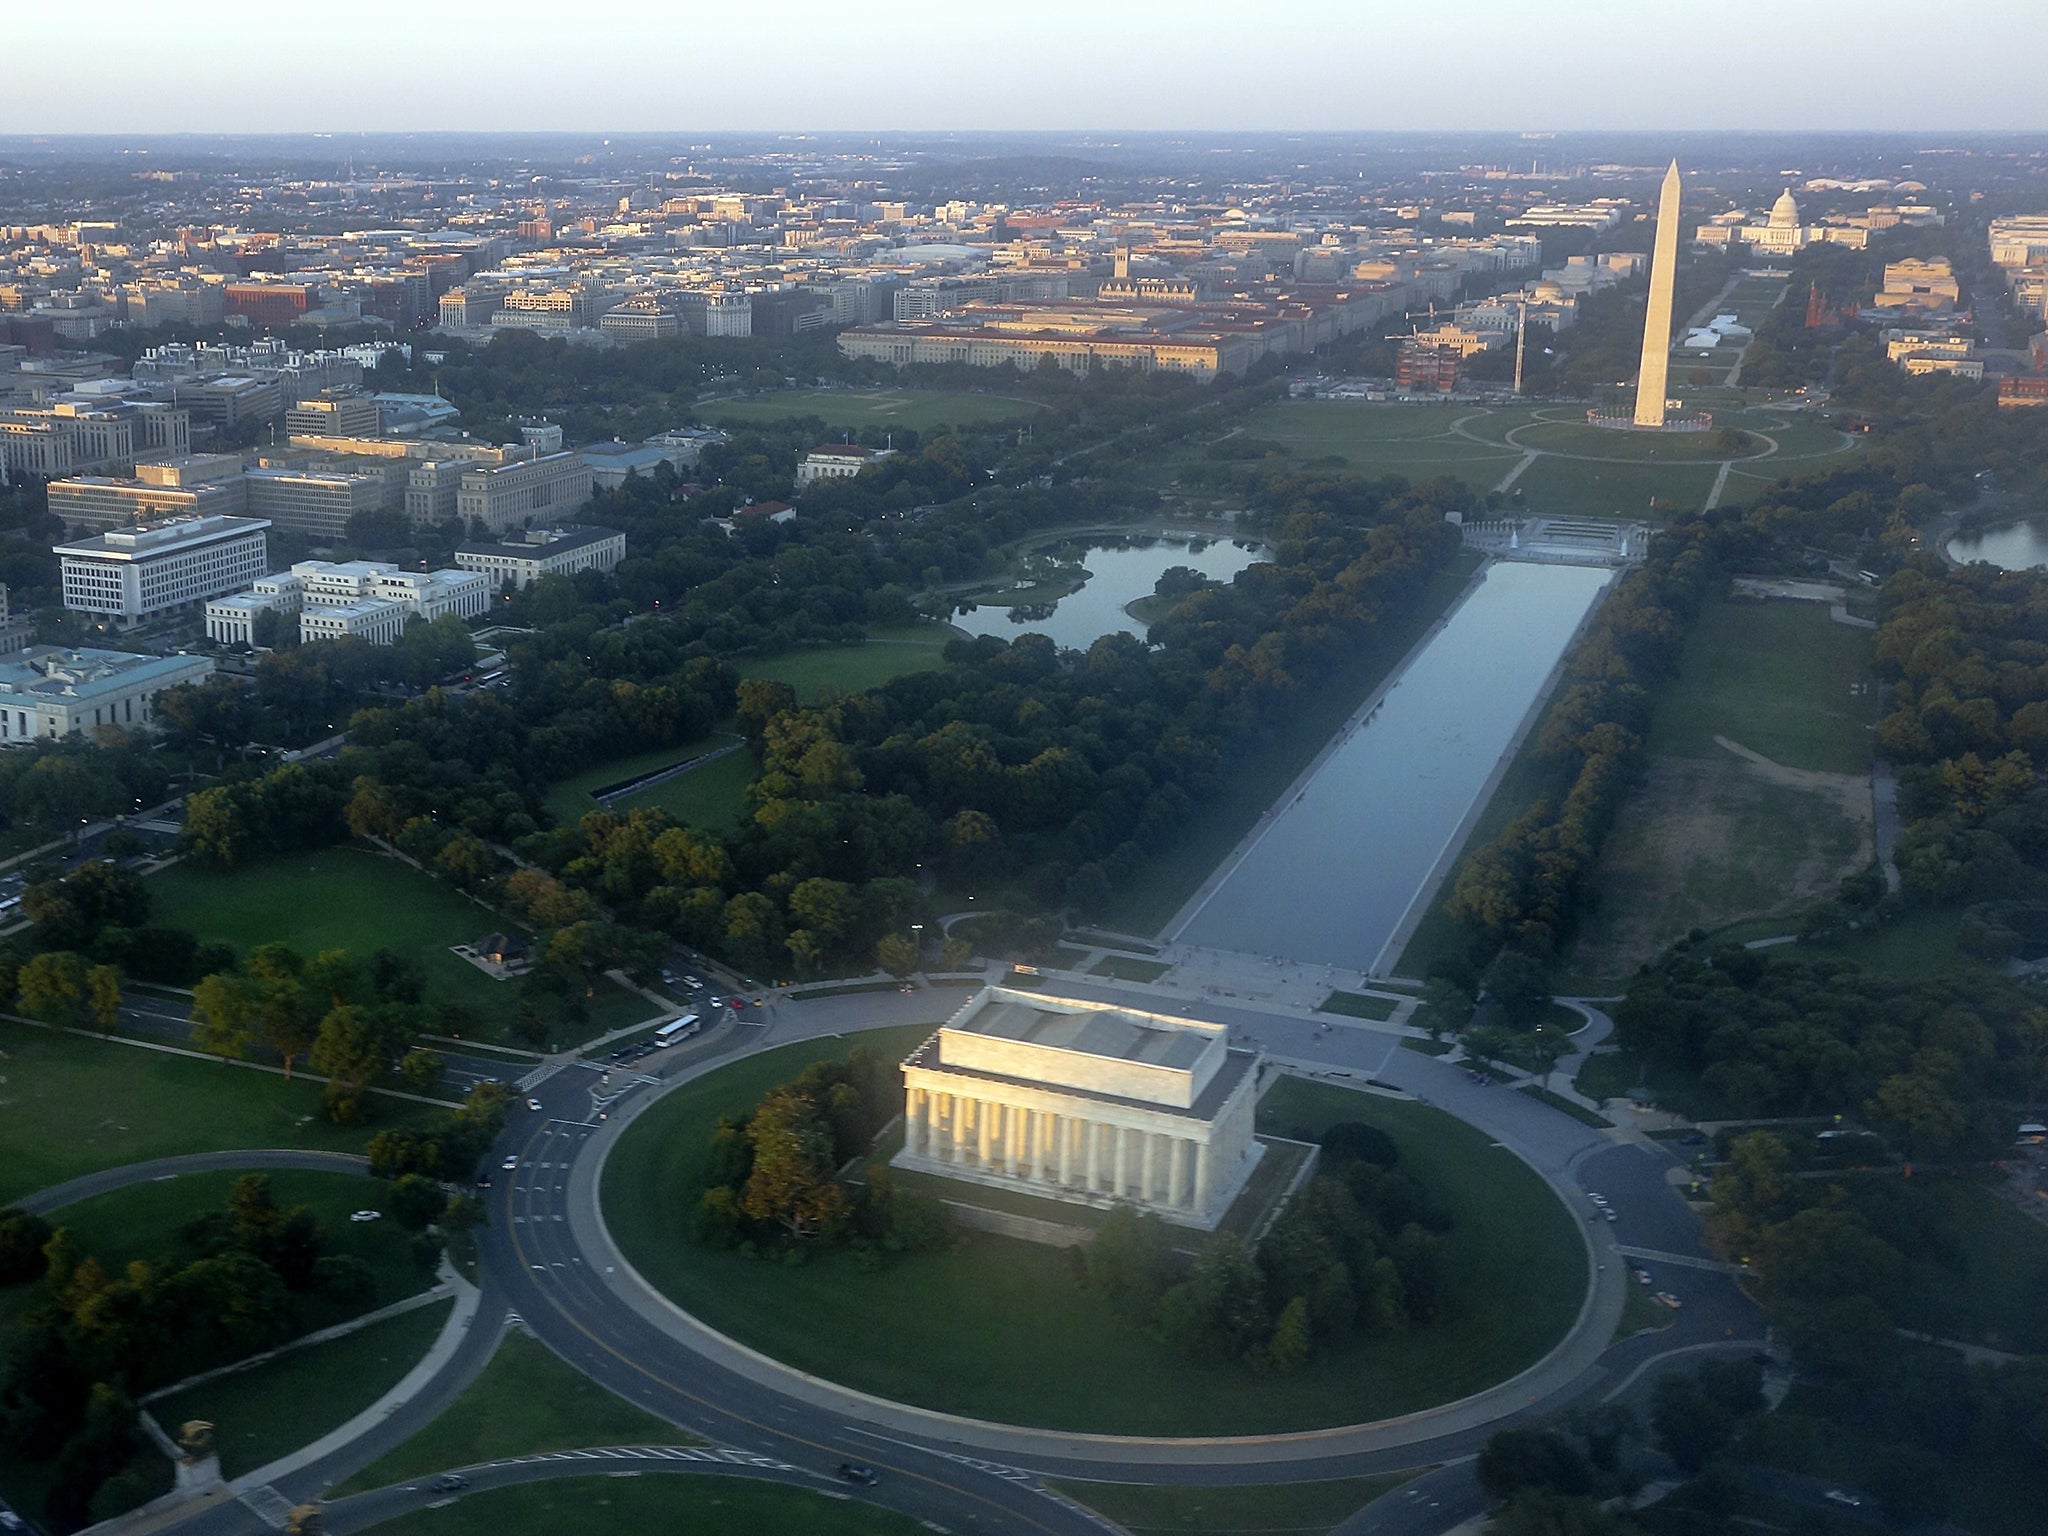 The skyline of Washington, DC, including the Lincoln Memorial, Washington Monument, US Capitol and National Mall, is seen from the air at sunset